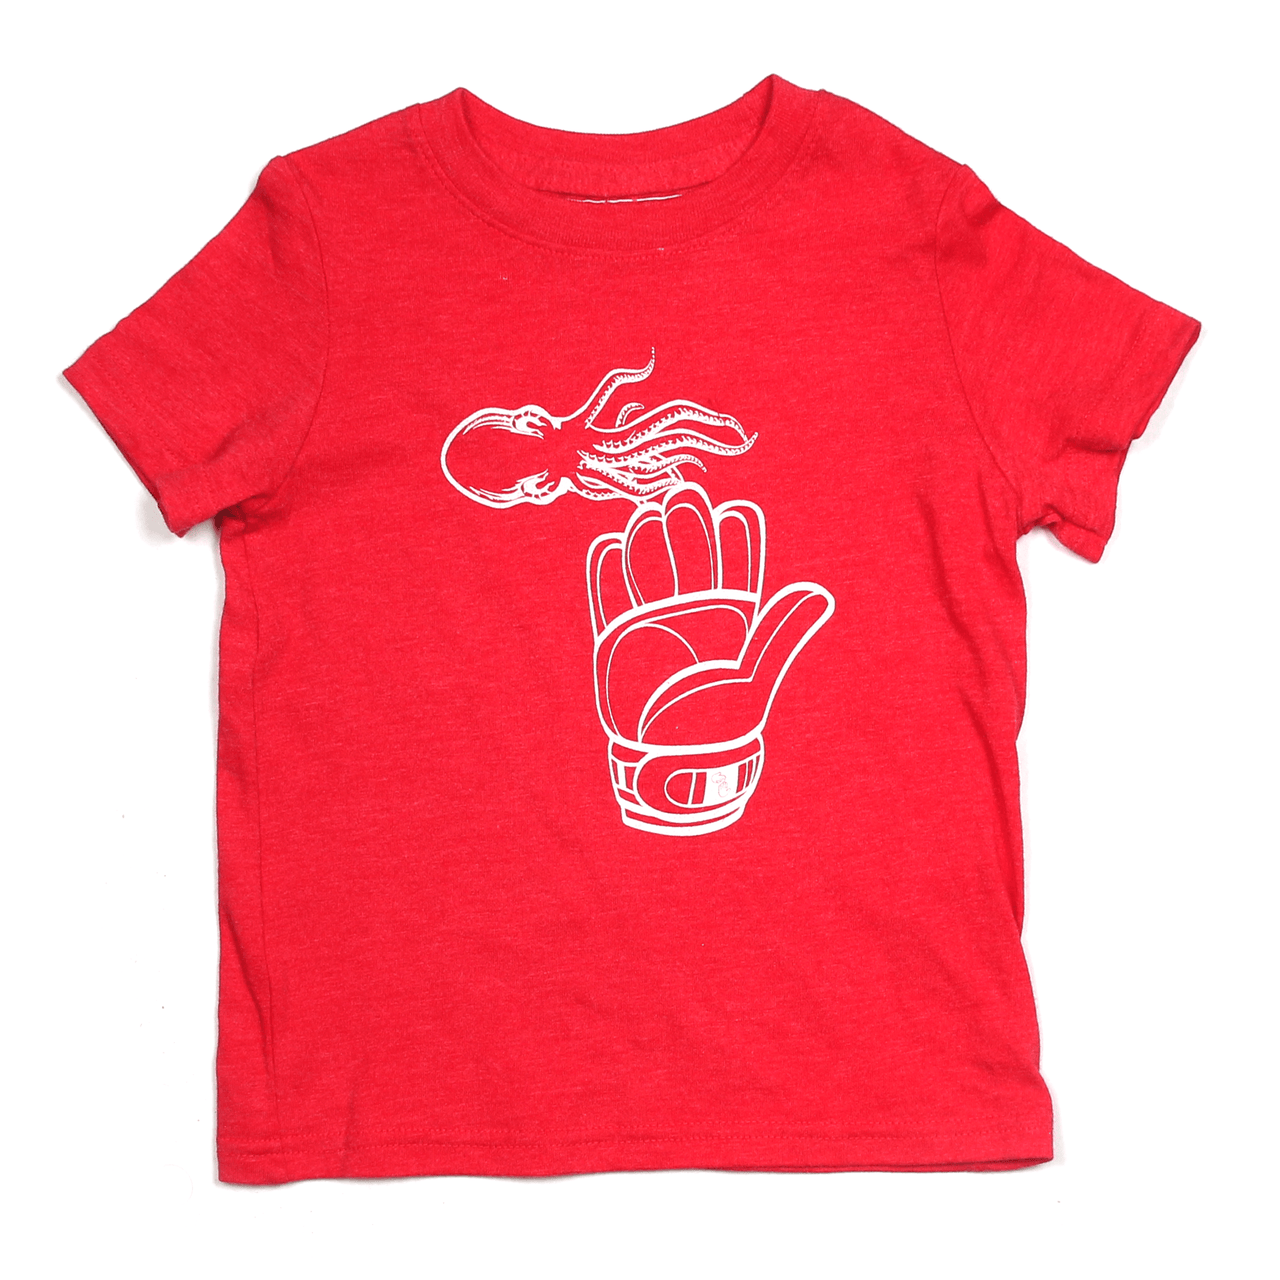 Hockey in the Glove Toddler Tee